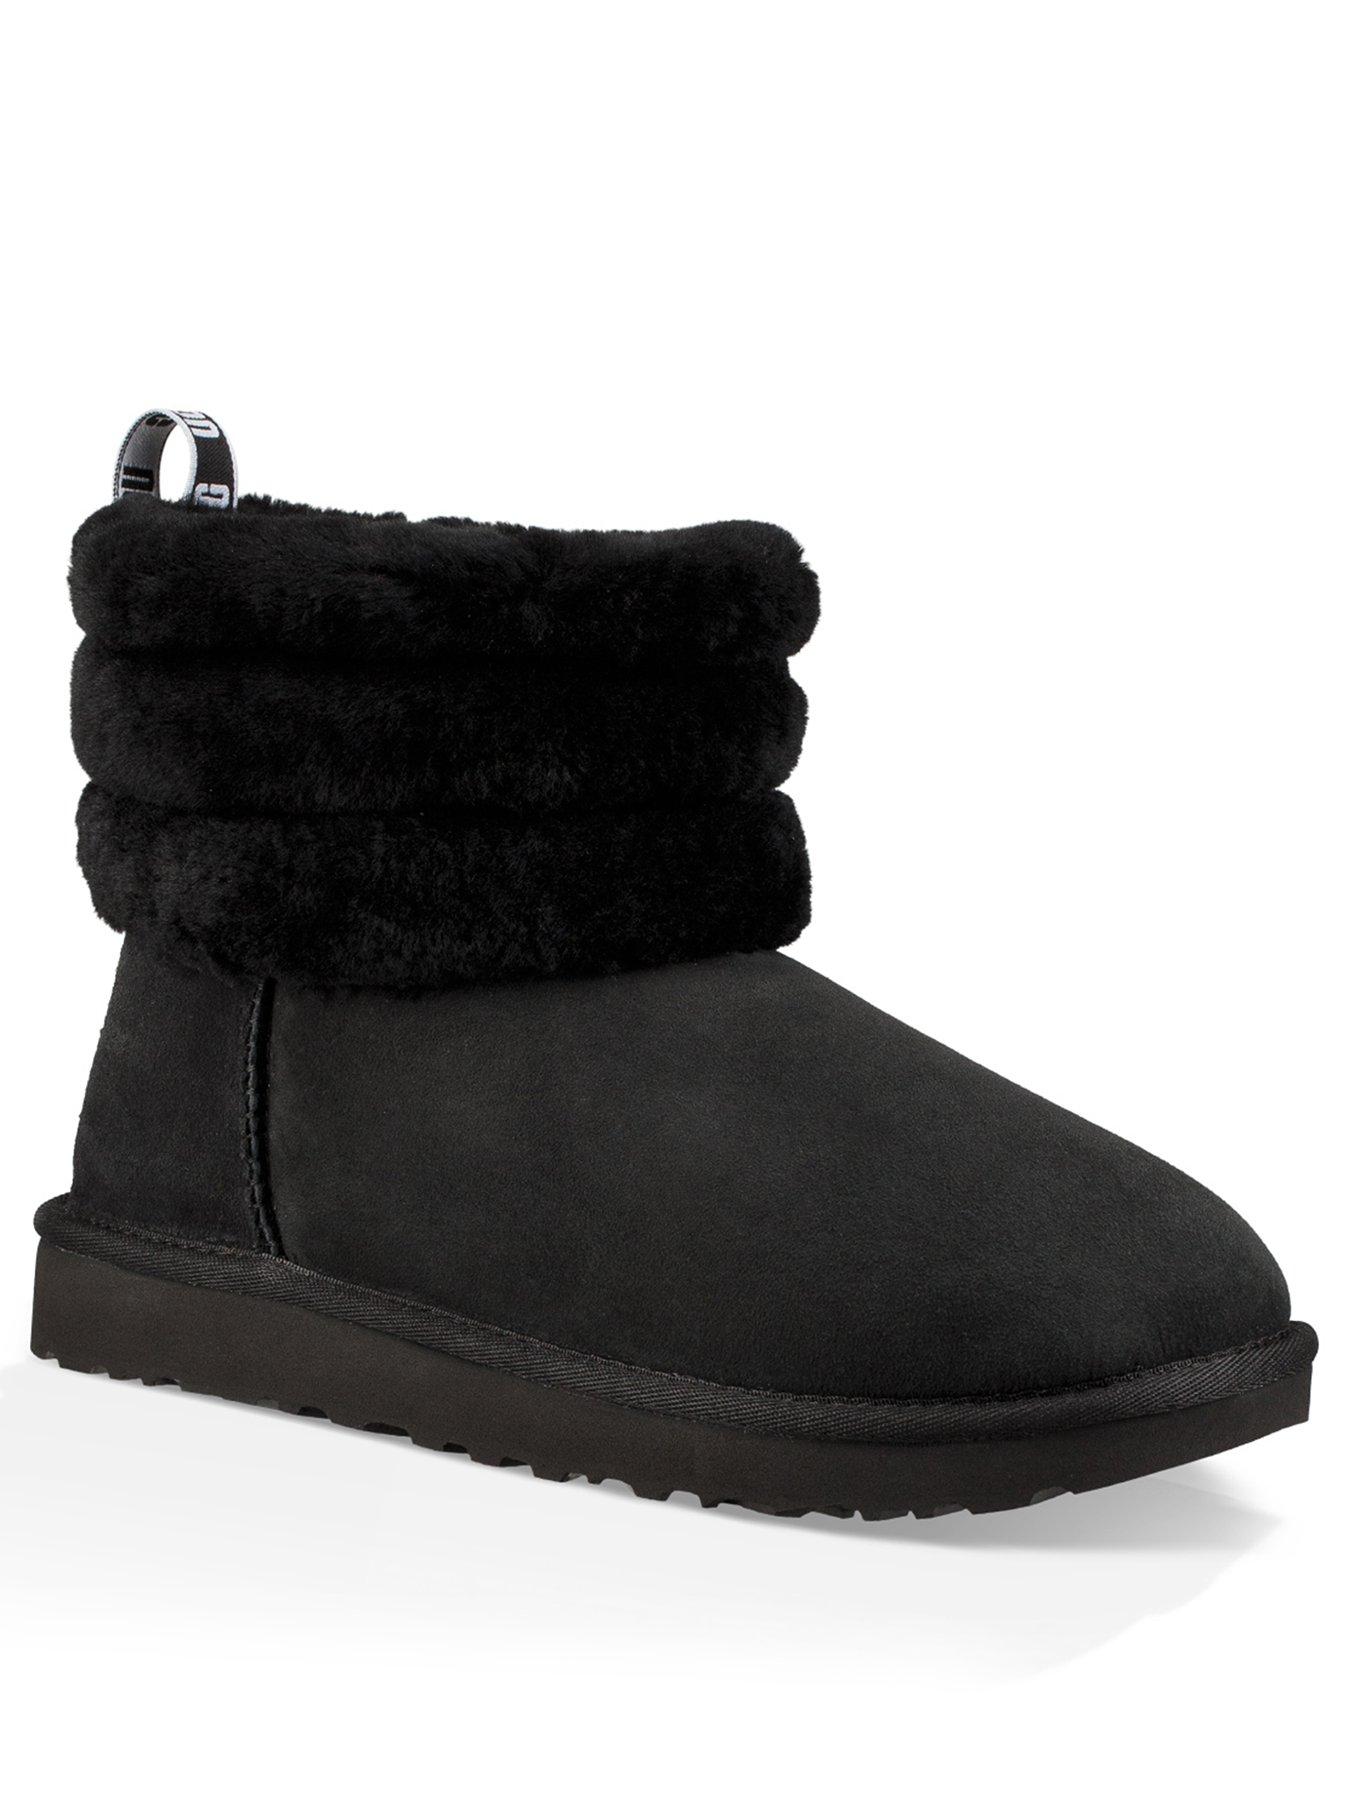 womens black leather uggs